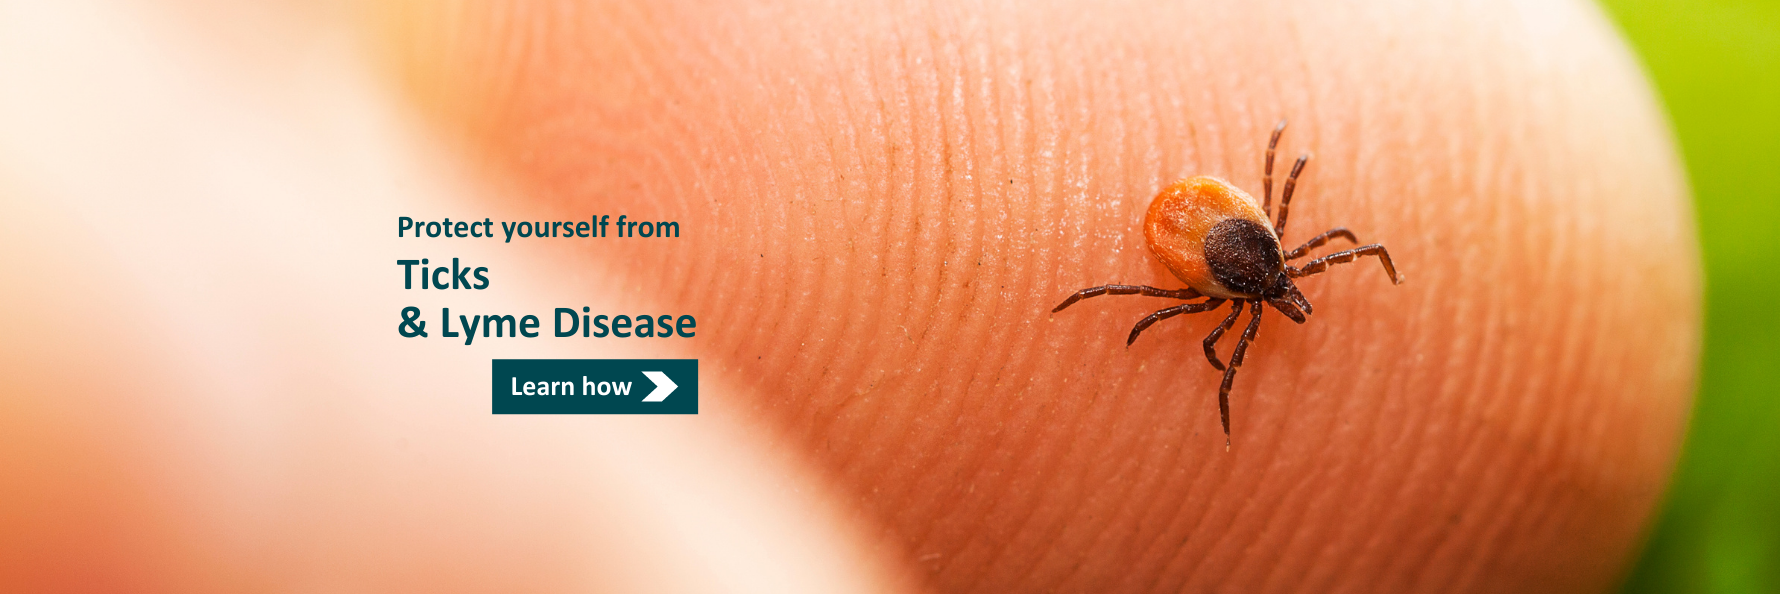 Close-up image of a tick on a fingertip. Text: Protect yourself from Ticks and Lyme Disease. Learn how. 